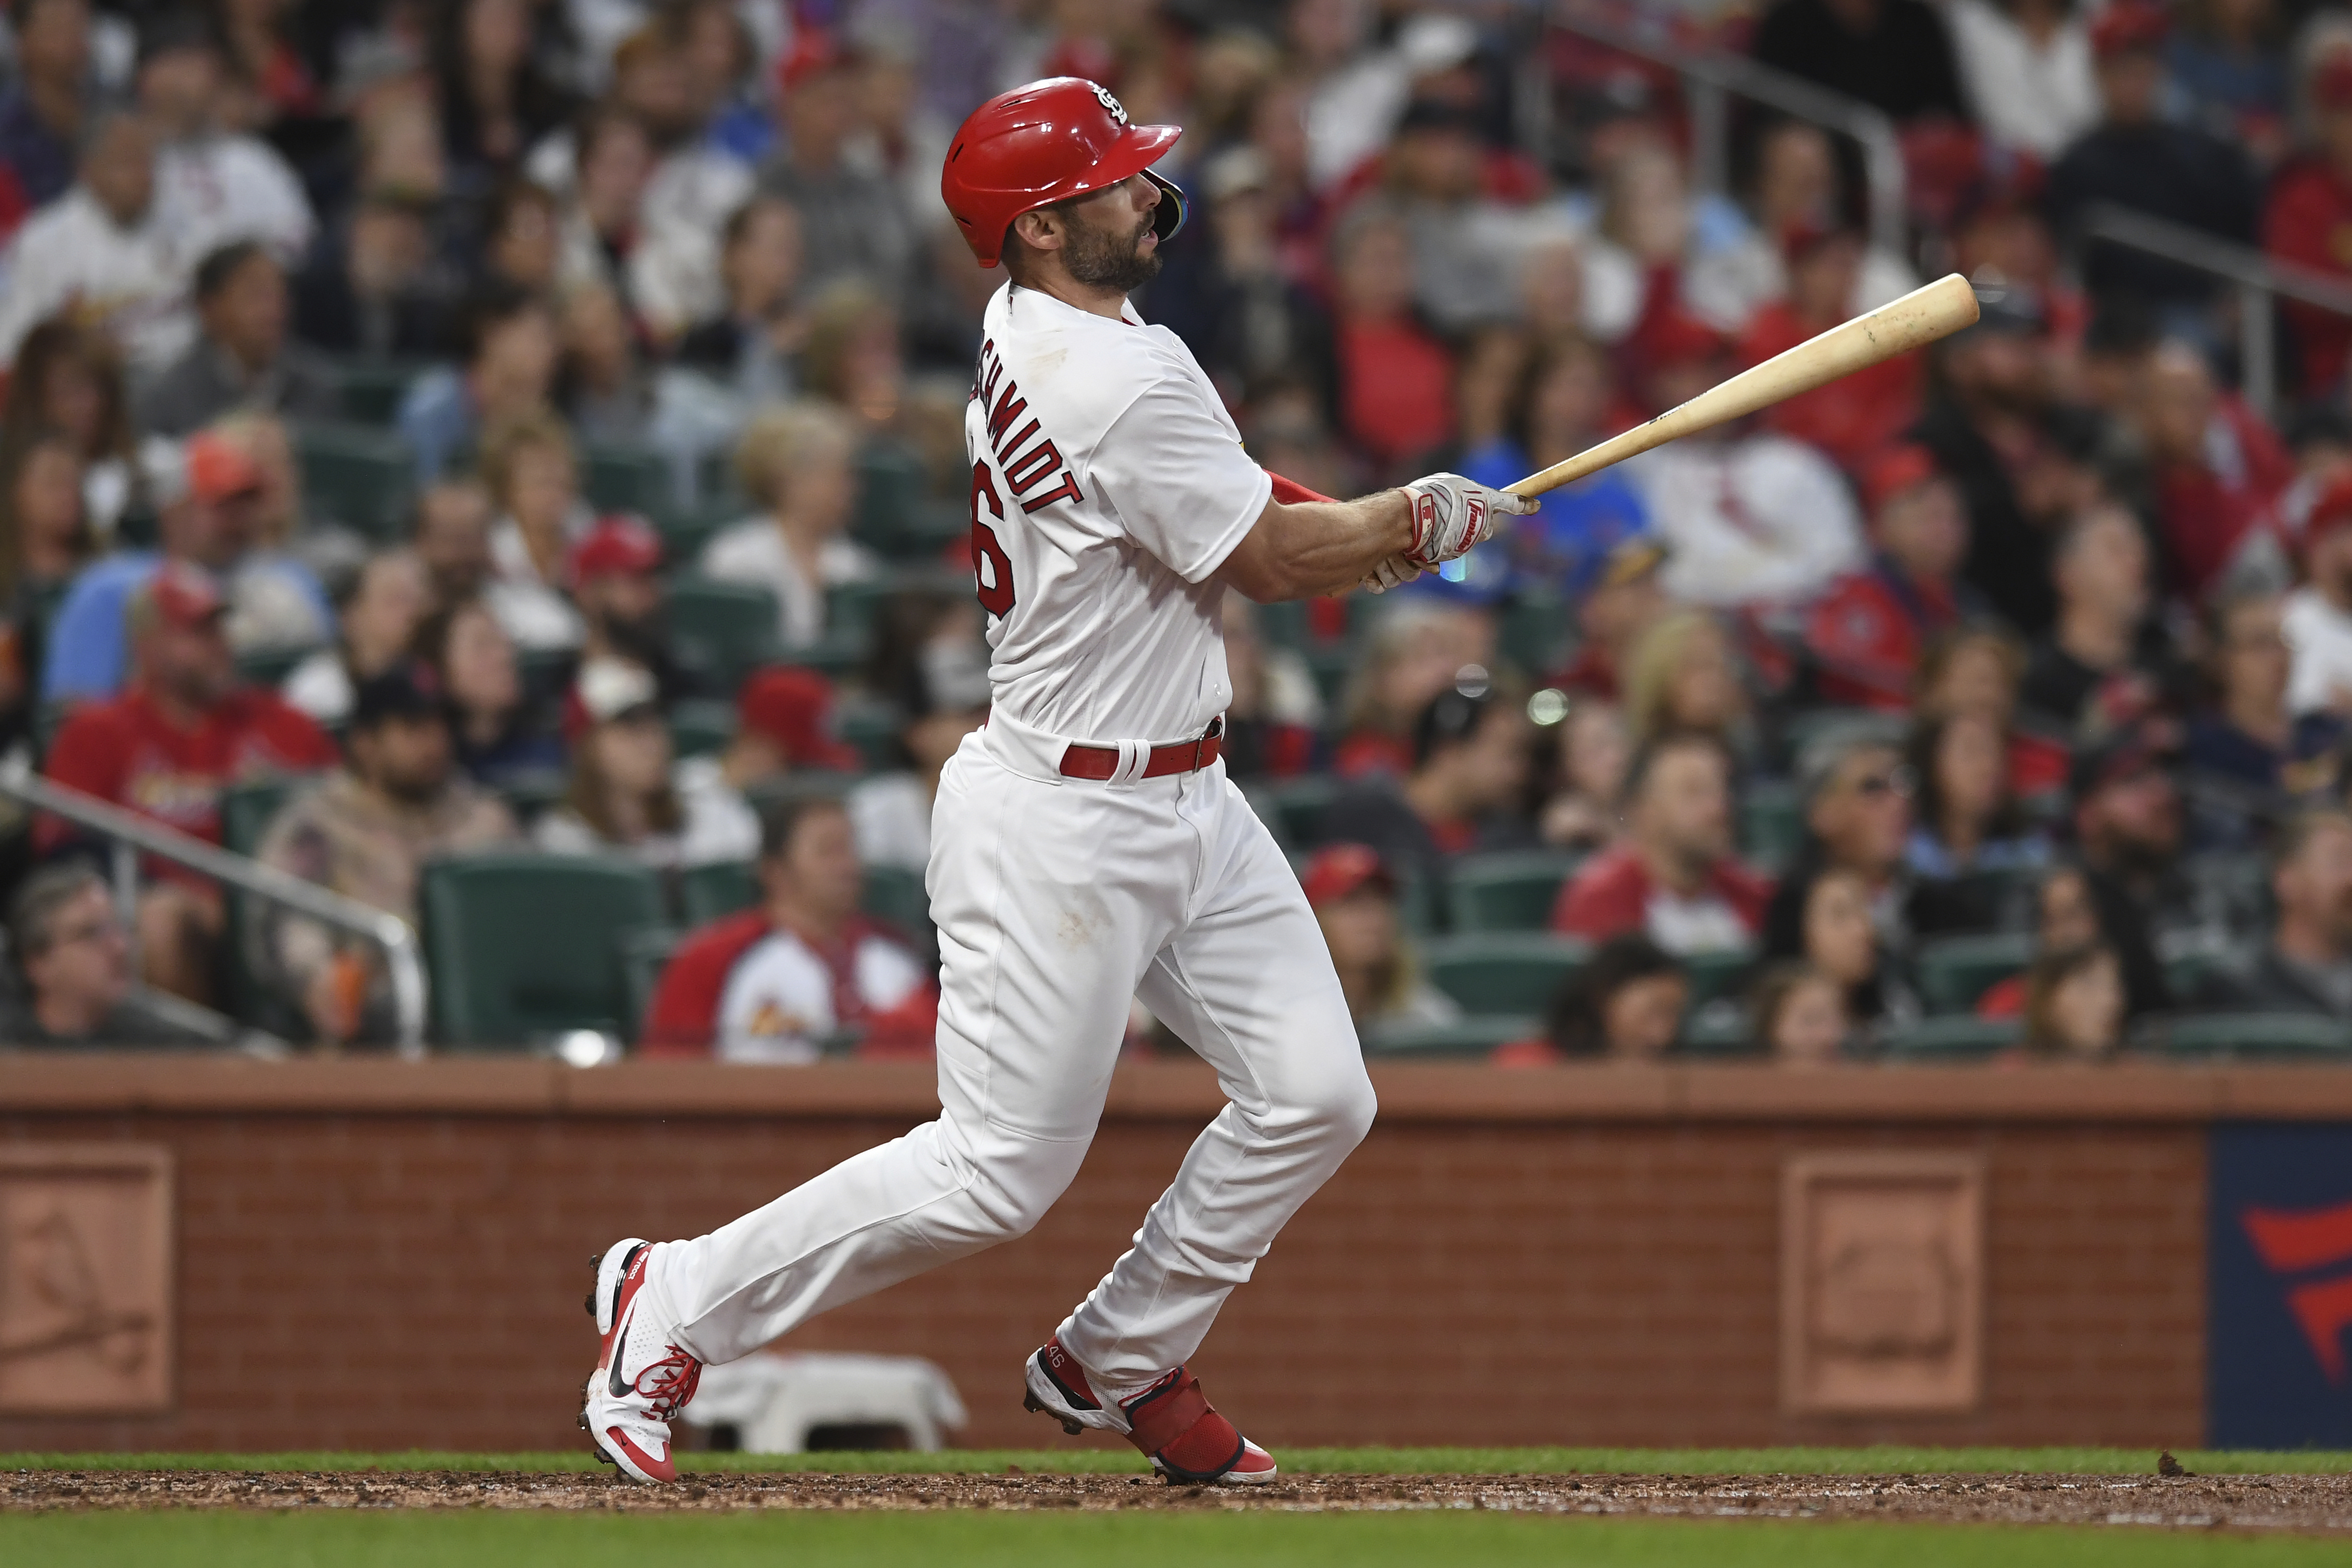 Cardinals' Goldschmidt named NL Player of the Month for May